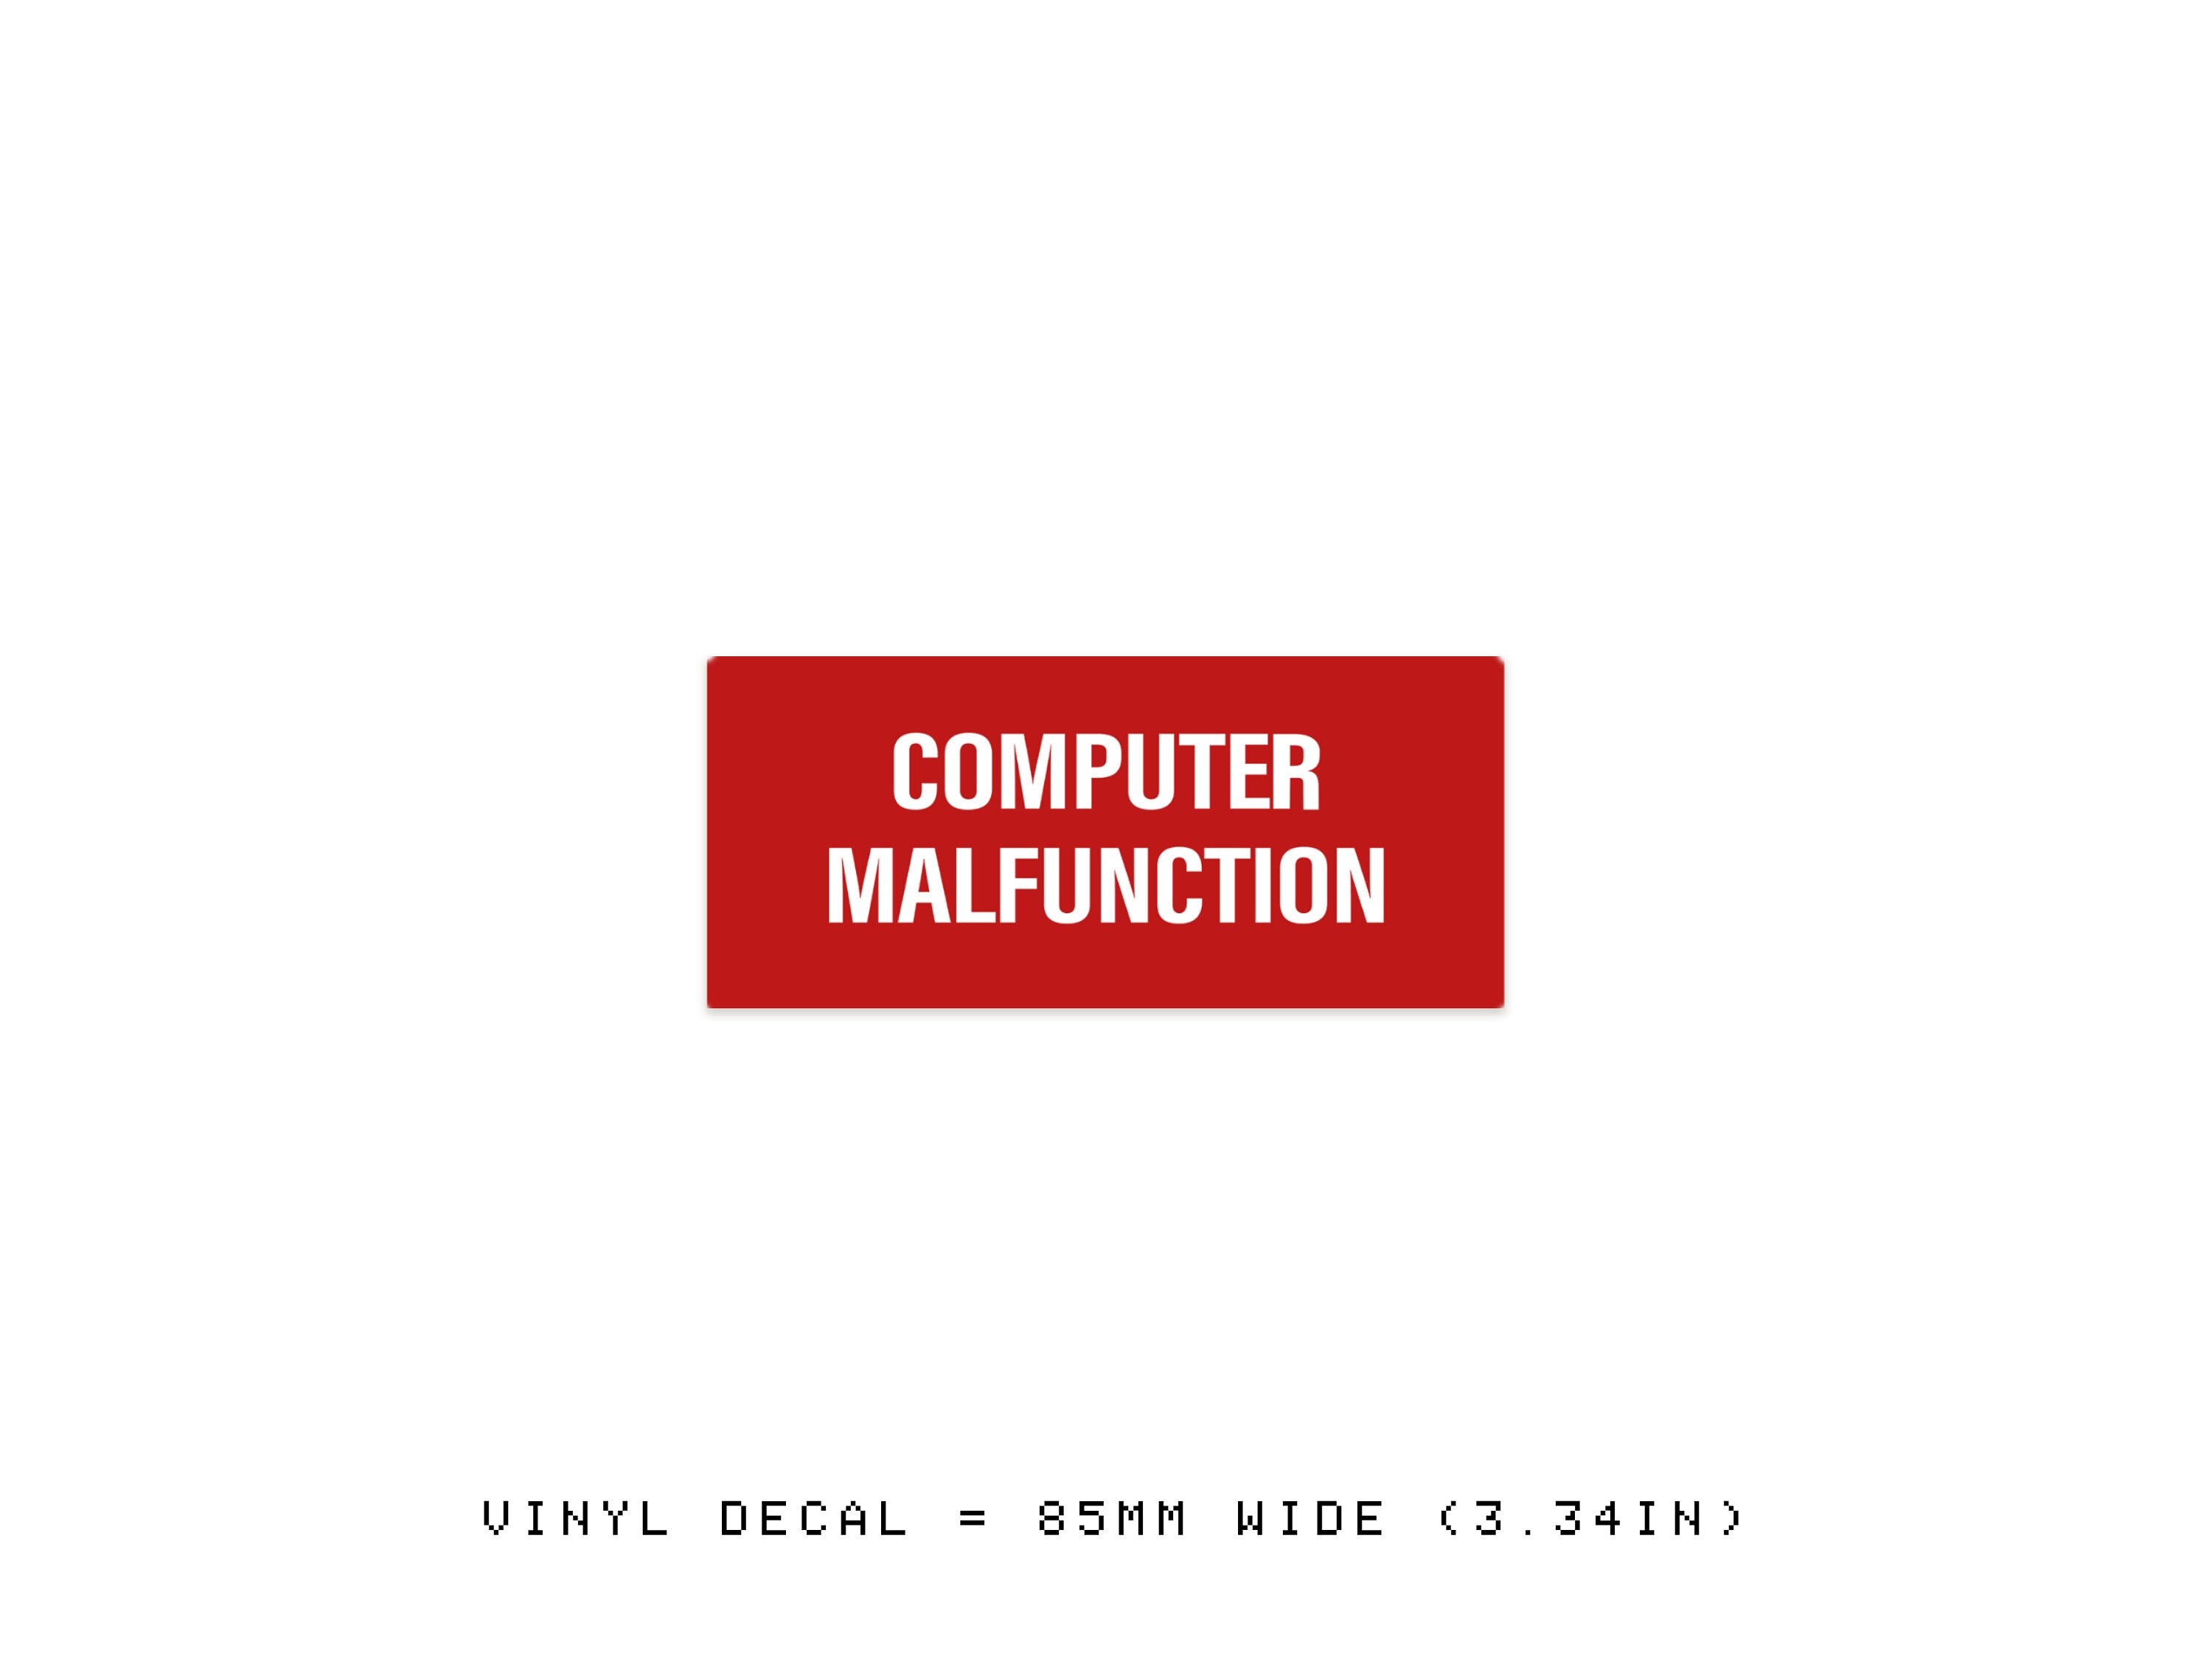 Space Odyssey System Malfunction Decals - Futuristic 2001: A Space Odyssey Laptop Sticker - Sci-Fi Car Decal